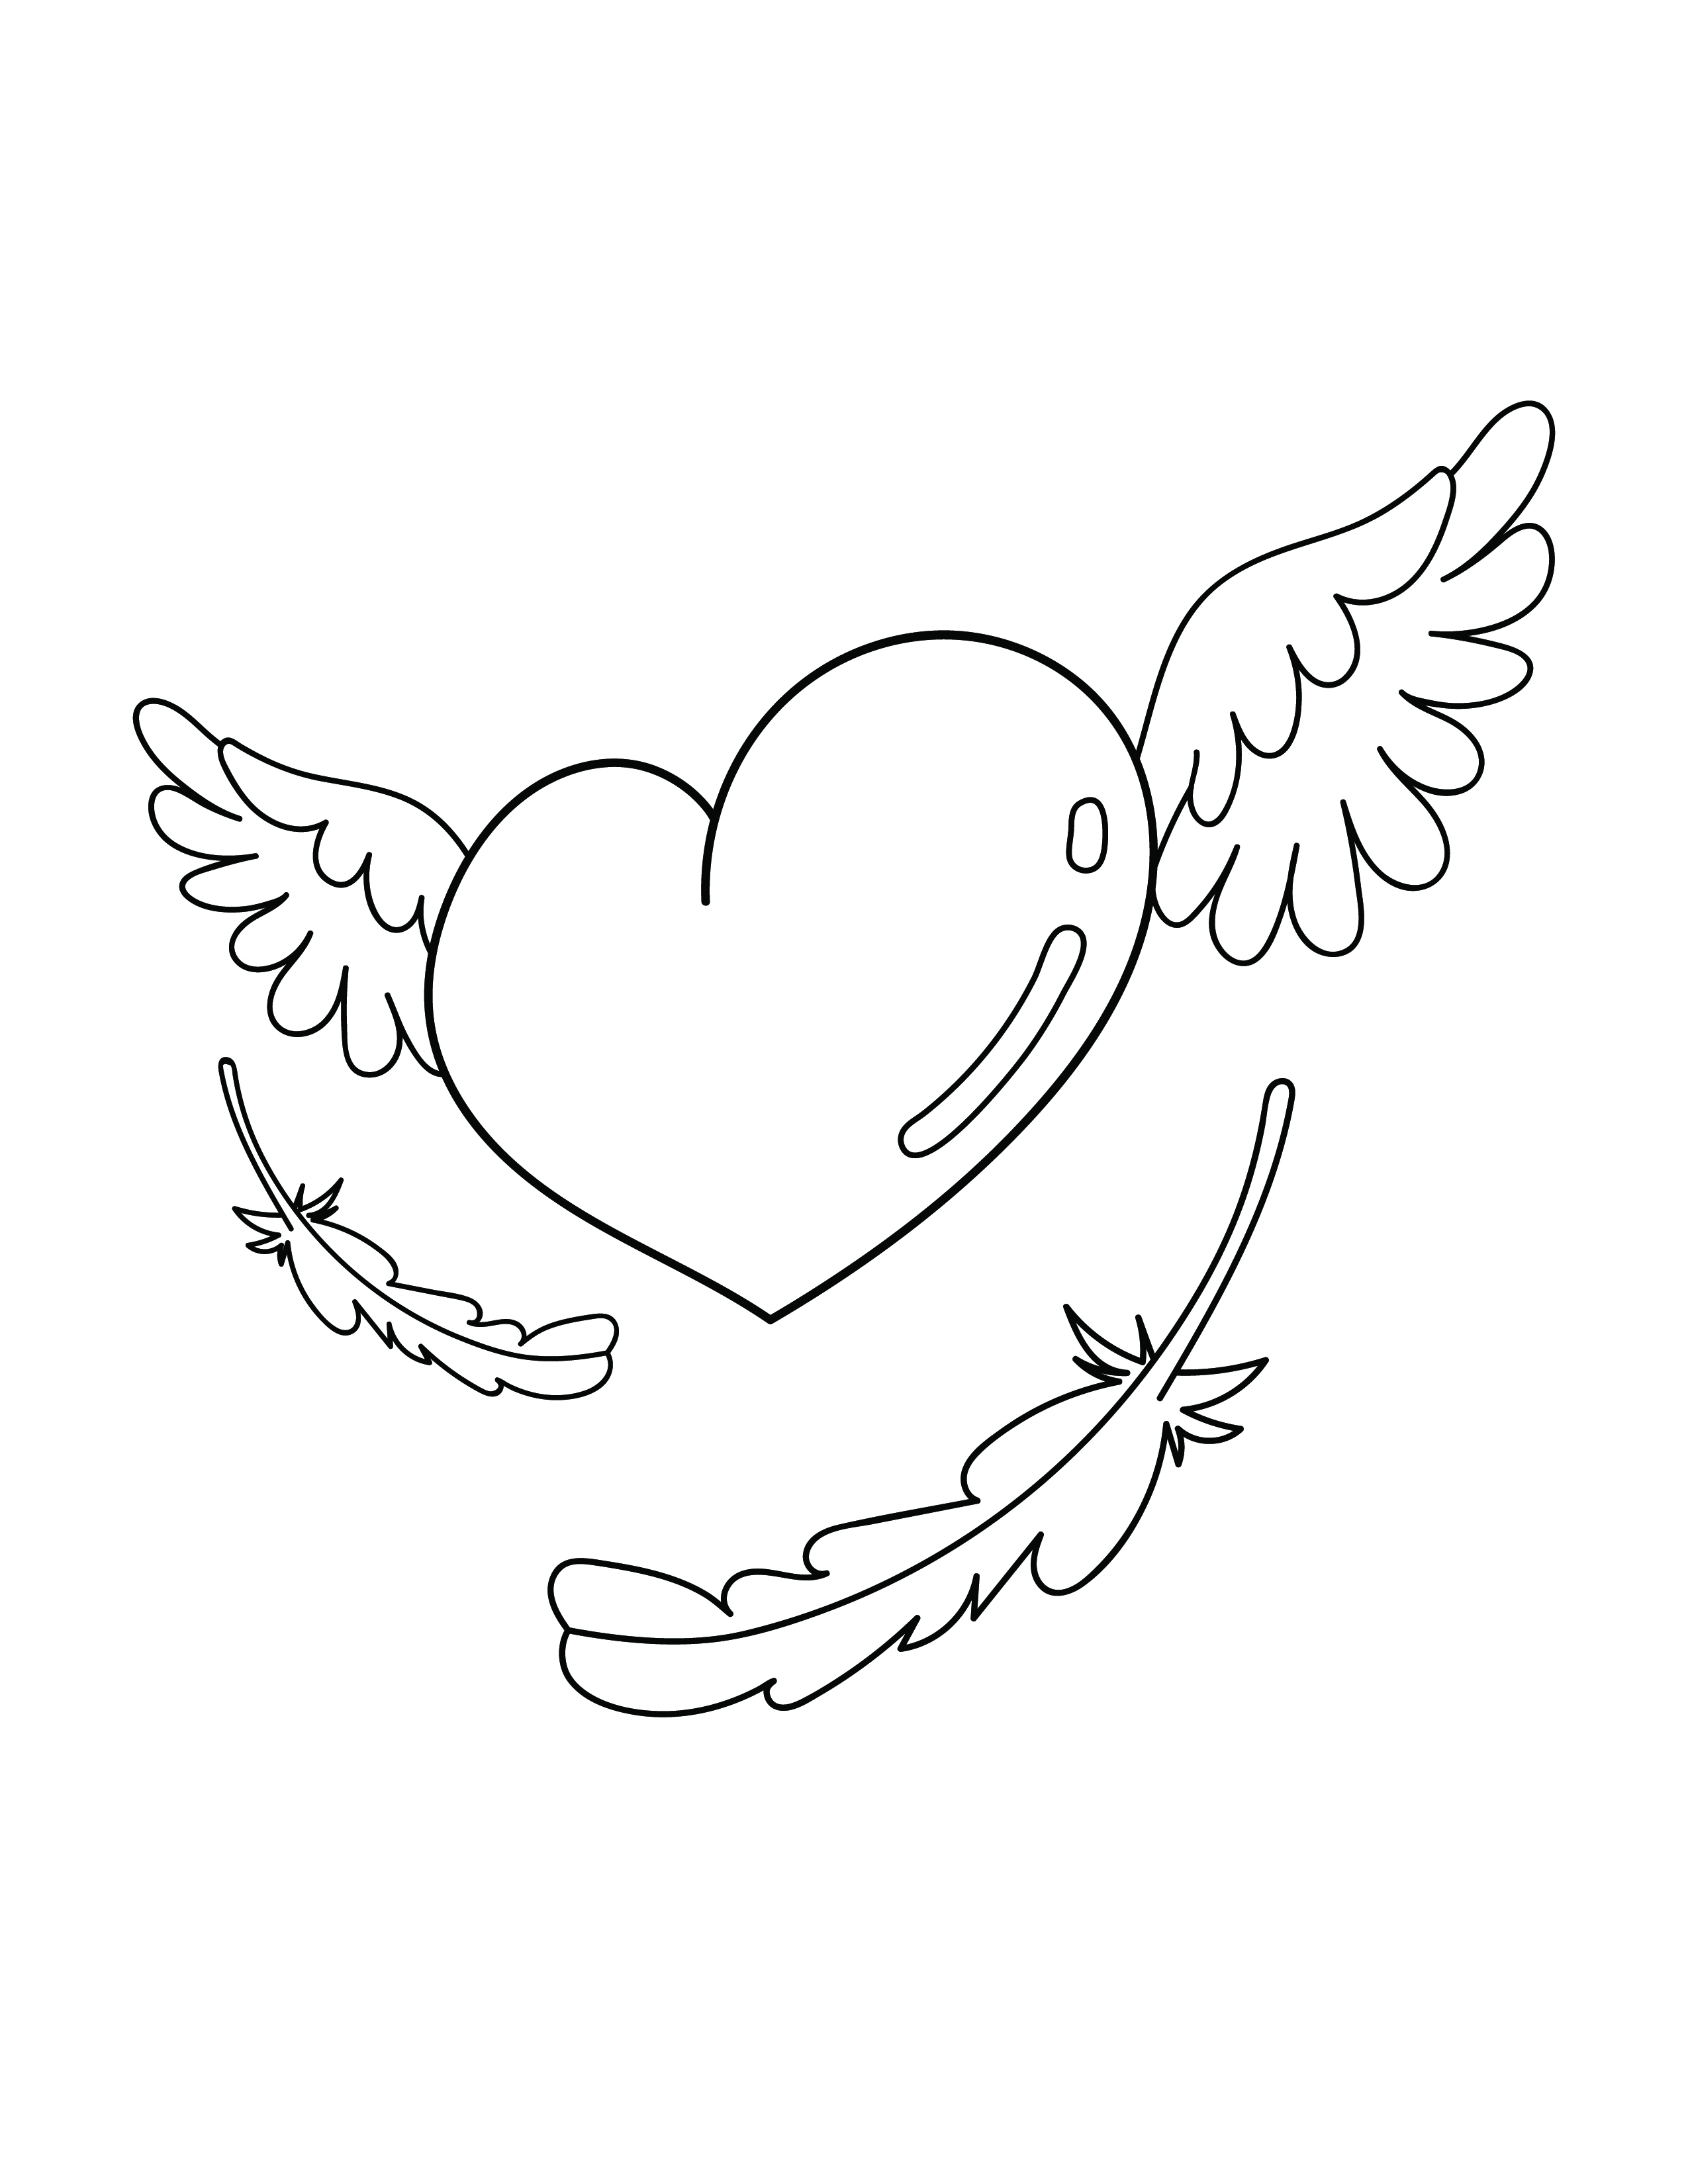 Free Heart Coloring Pages Templates, 50+ Download | Template.net